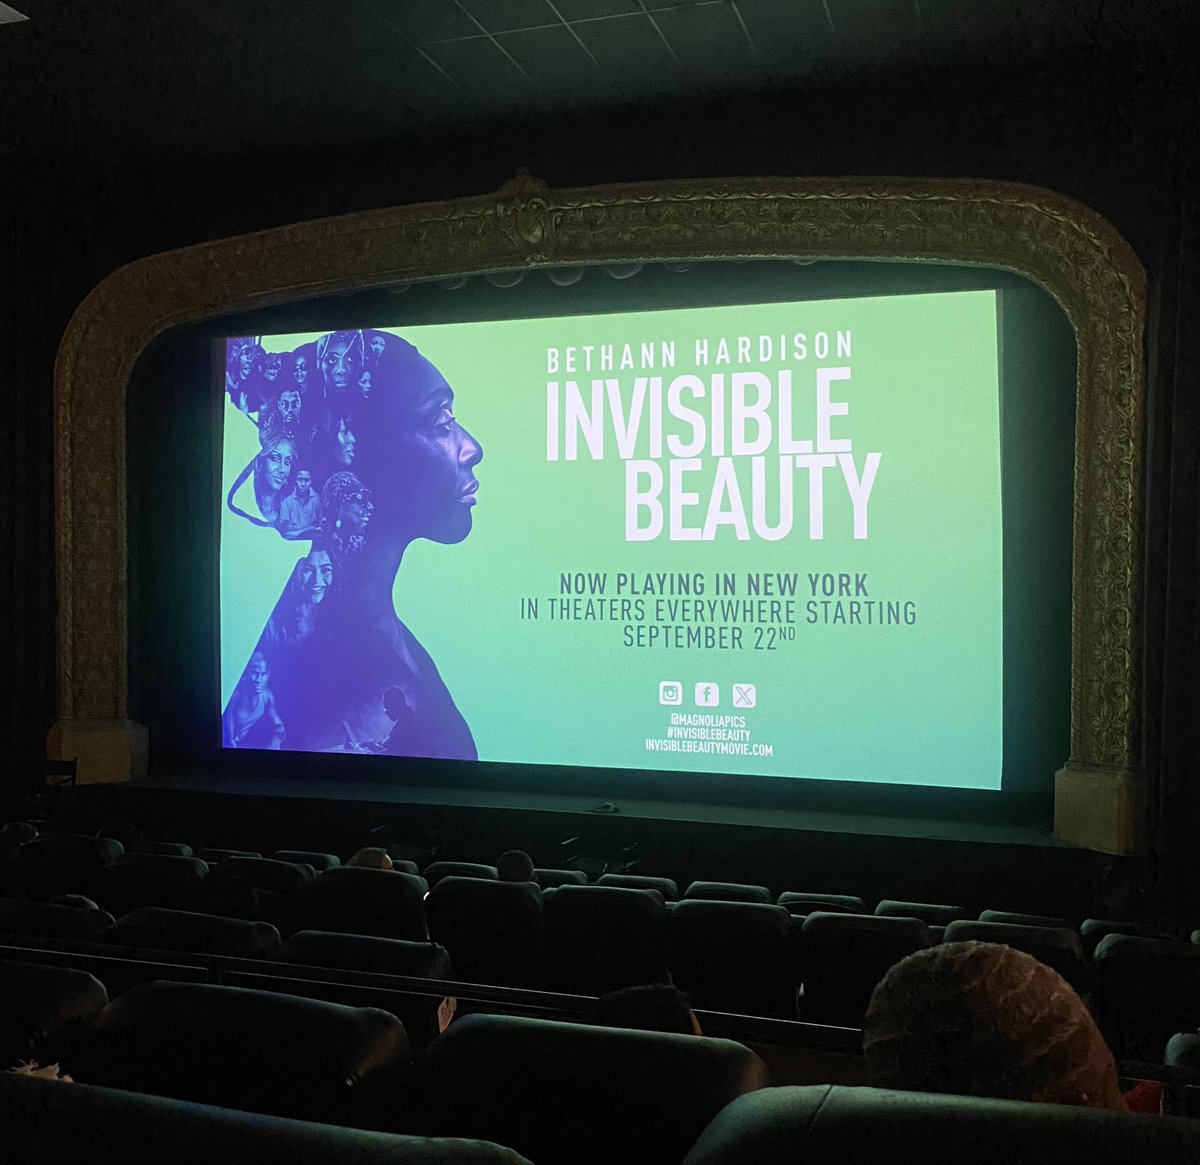 Got the opportunity to support #InvisibleBeauty tonight.

Do yourself a favor and check out this empowering film from the fashion pioneer & advocate, Bethann Hardison 🙏🏽